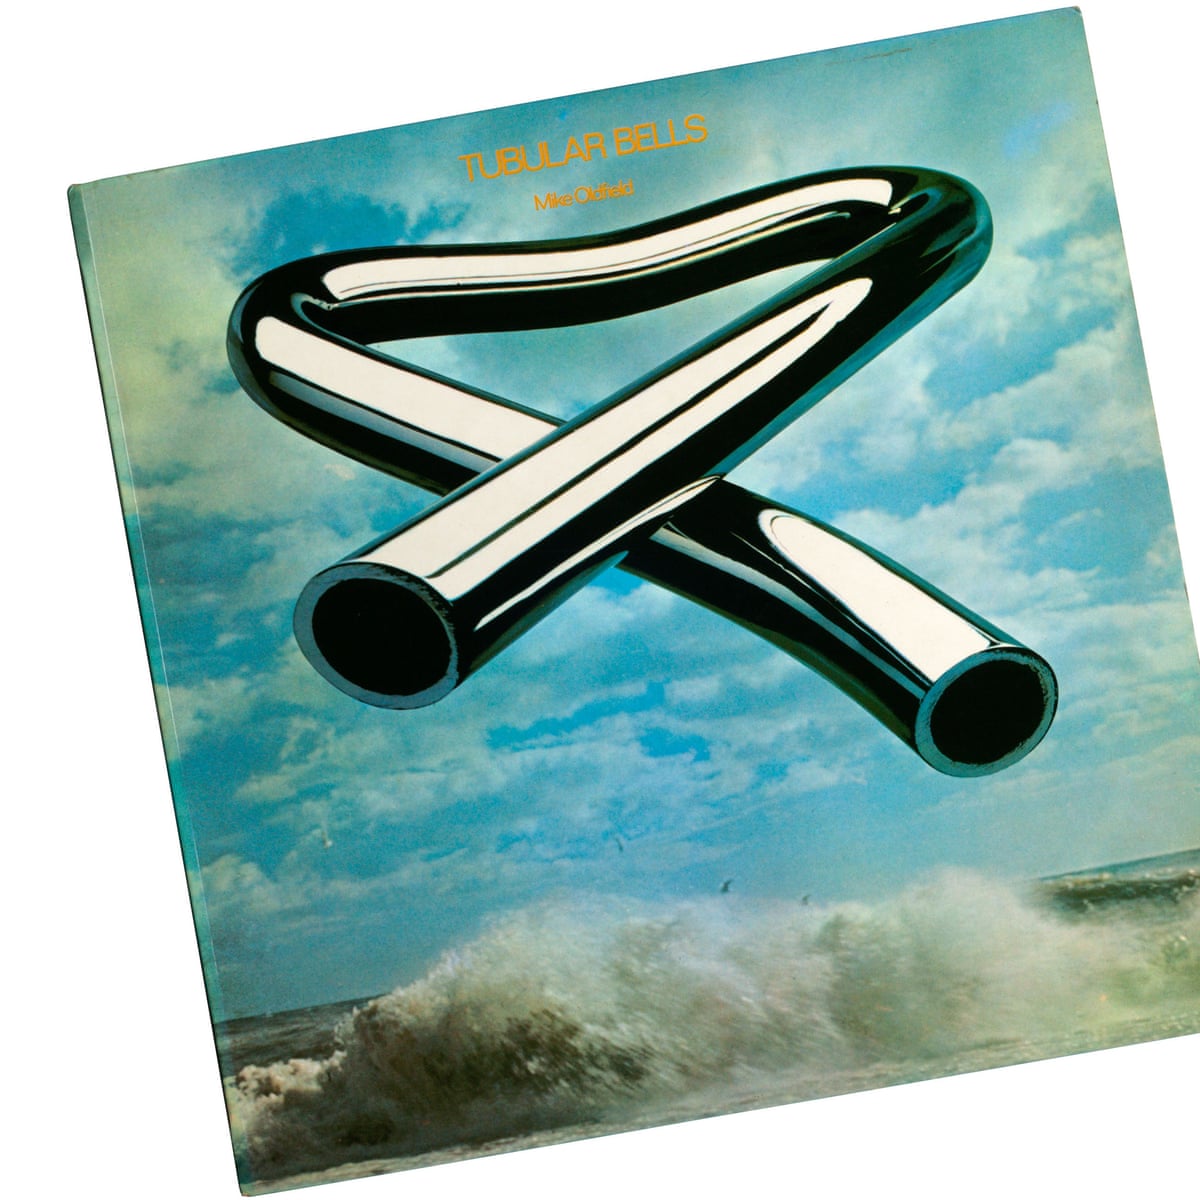 From Bells to Horses: 10 the best pieces of album artwork | The Guardian